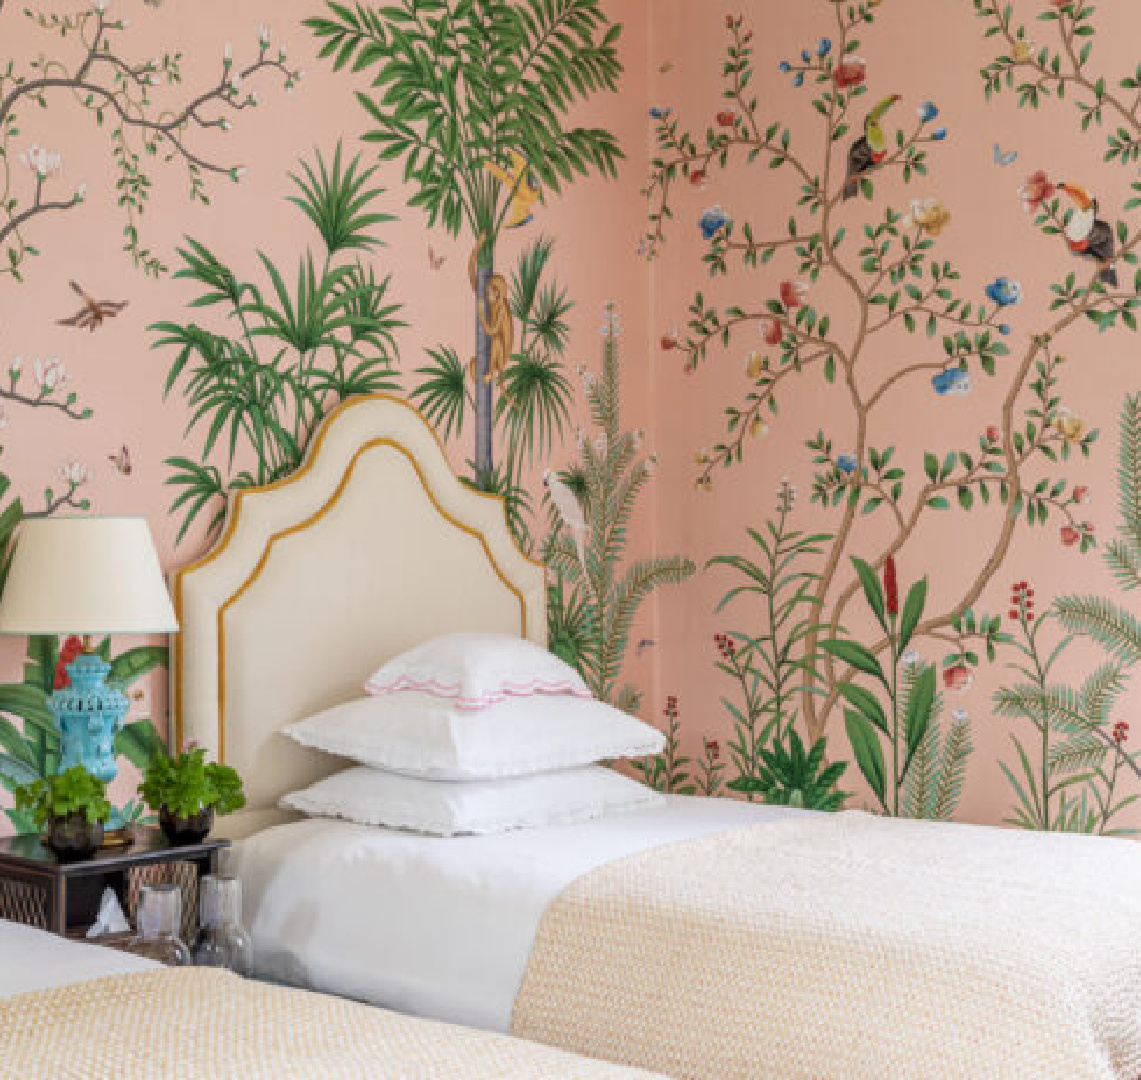 Pink handpainted de Gournay wallpaper. Samantha Todhunter - Oxfordshire 1707 home. #englishcountryhome #historichomes